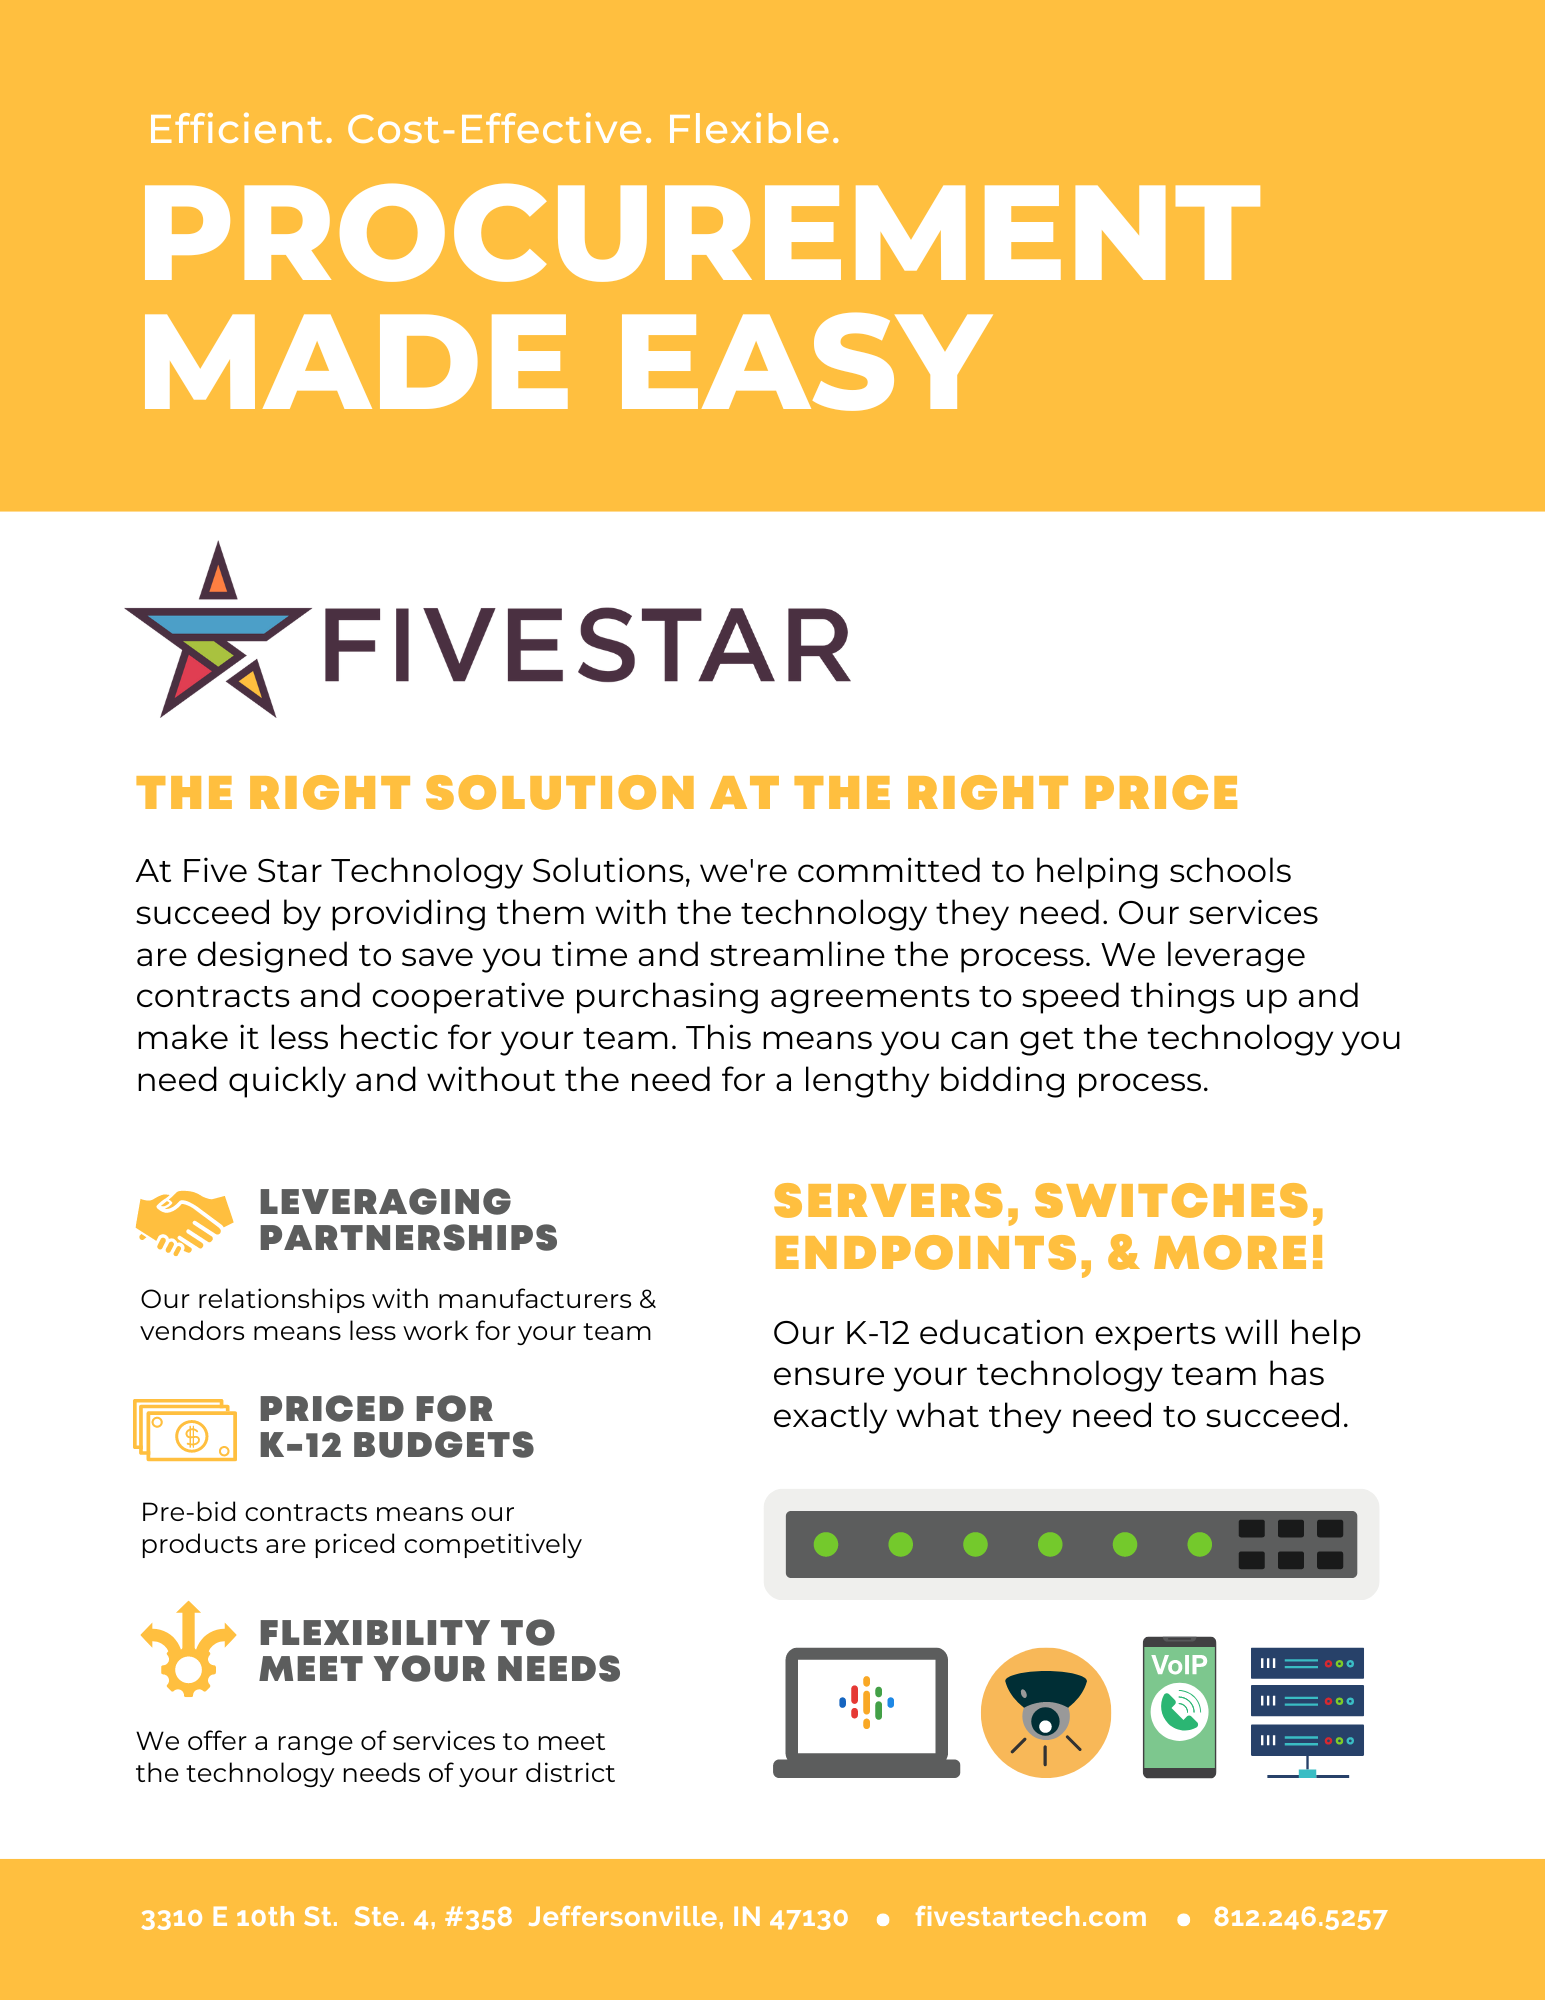 K-12 Procurement Made Easy with Five Star Technology Solutions